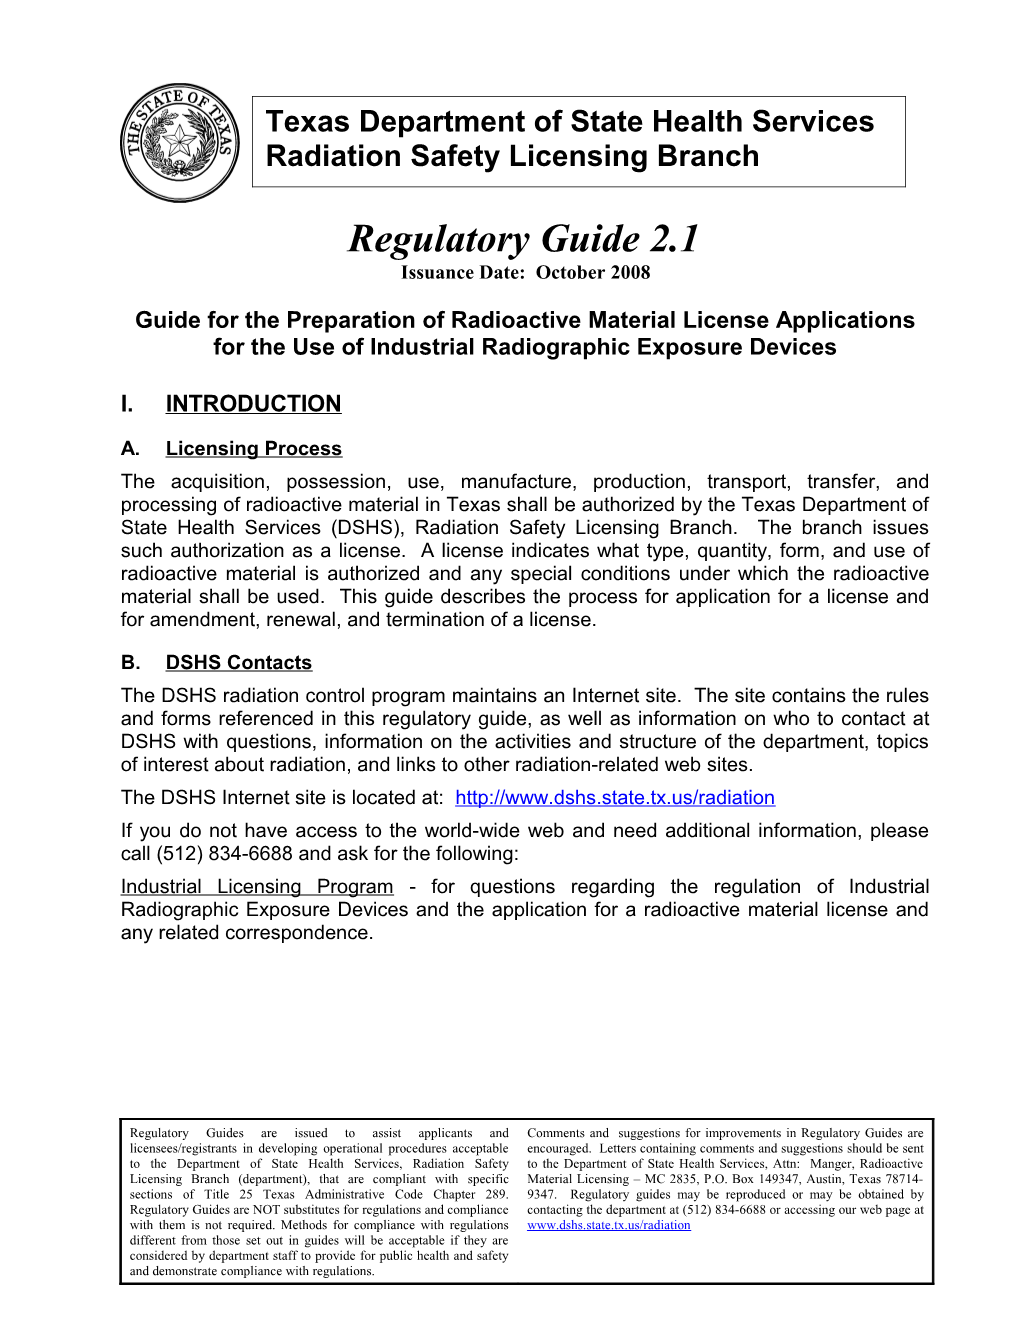 Texas Radiation Safety Licensing Branchregulatory Guide 2.1Ind. Radiographylicense Application